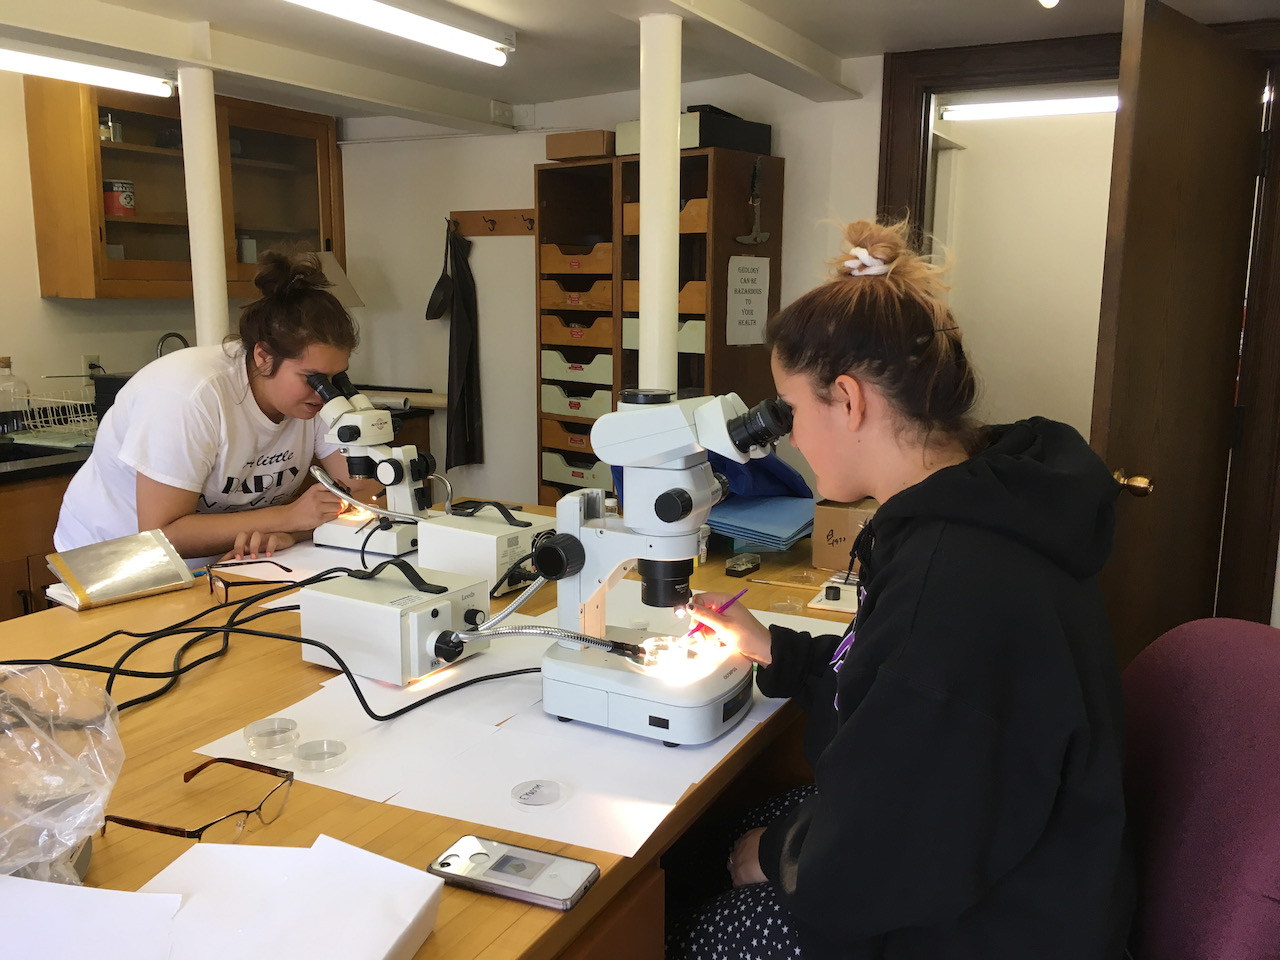 Students use petrographic microscopes to examine mineral samples